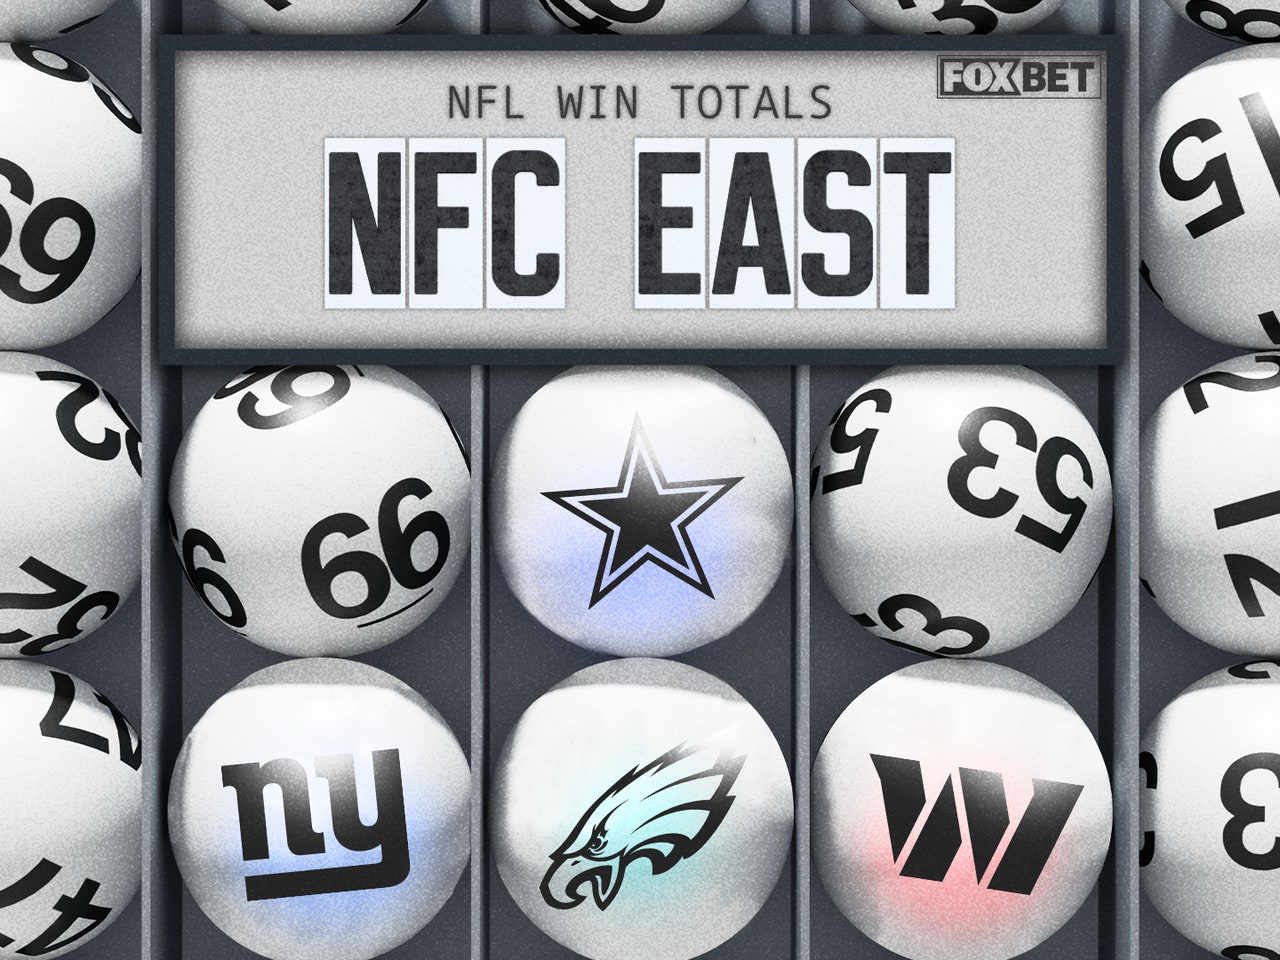 NFL division winner odds: NFC East, AFC South are targets